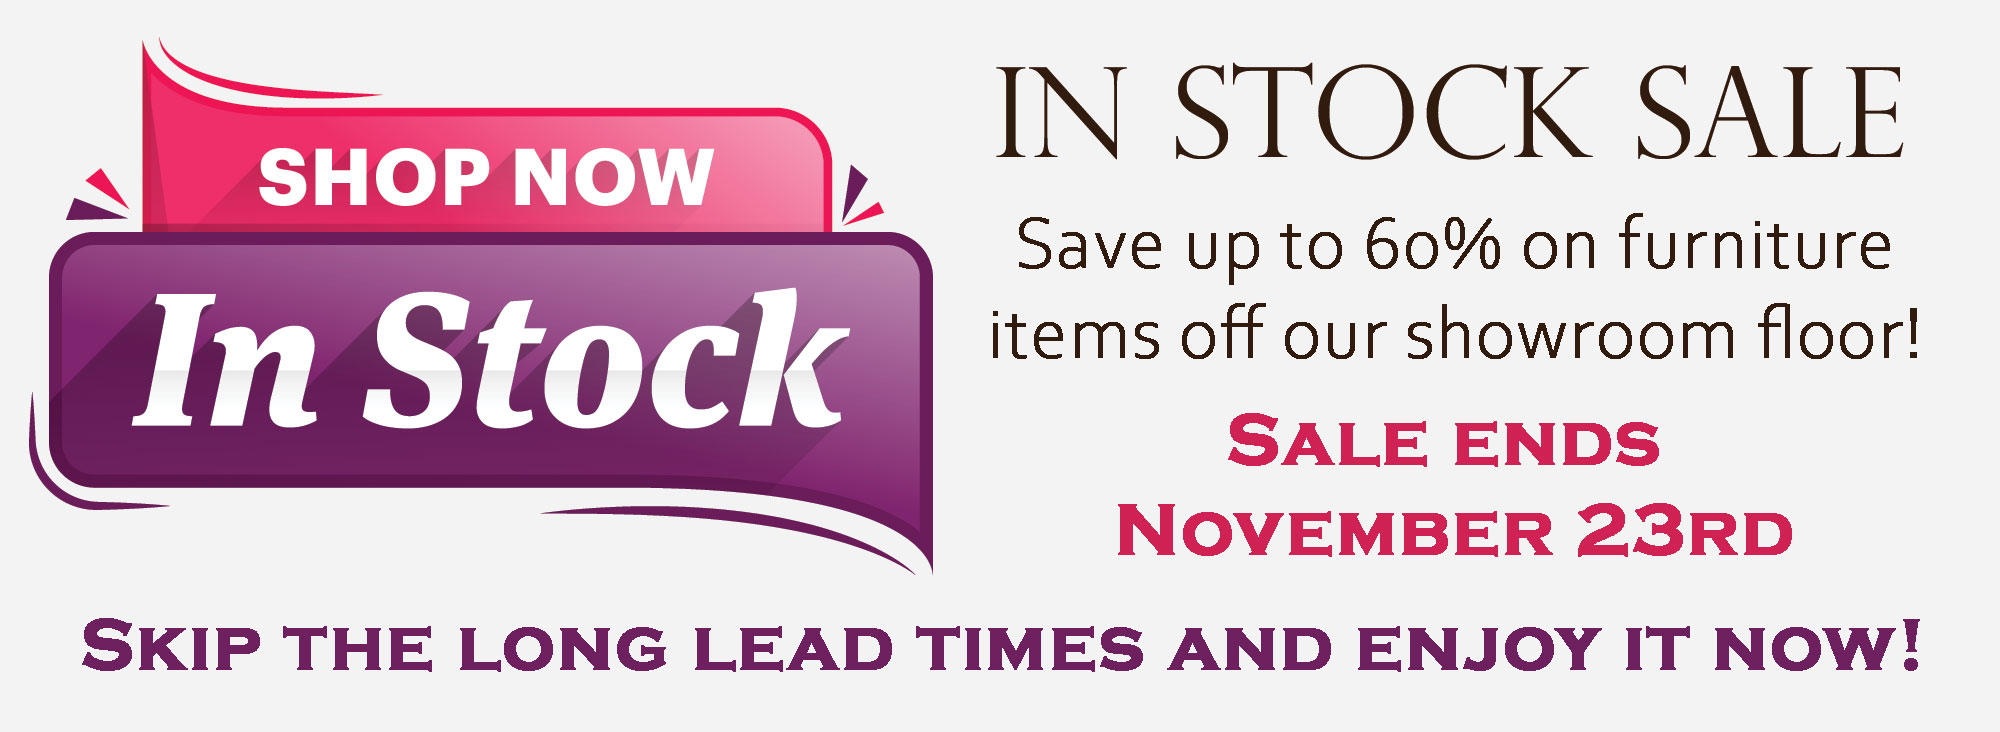 In-Stock Sale - Save up to 60% on furniture items off our showroom floor! - Sale ends November 23rd